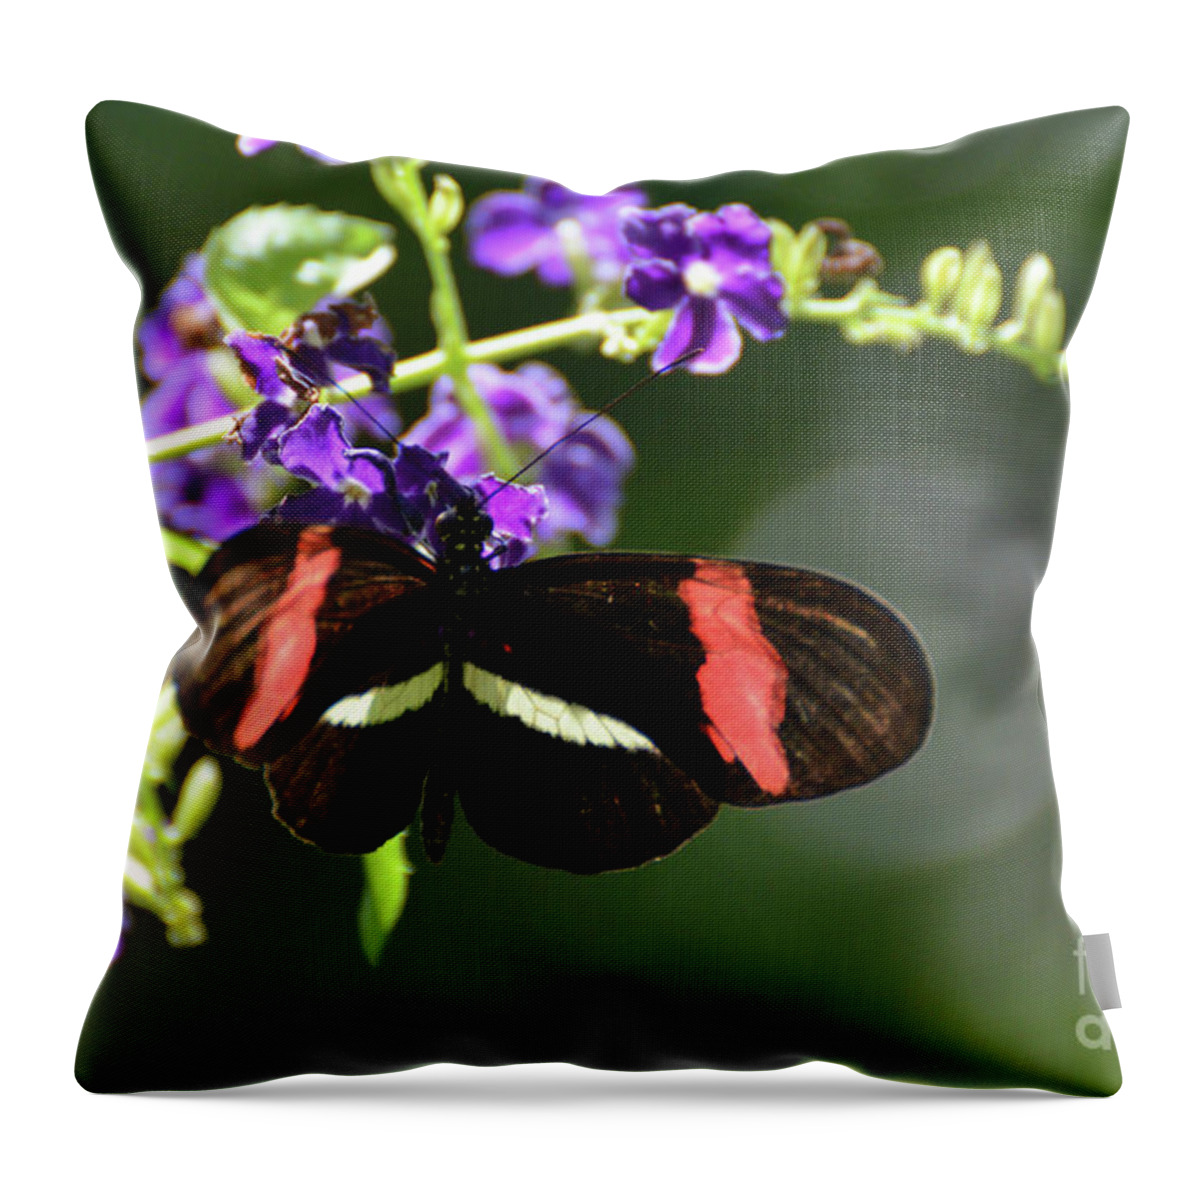 Postman-butterfly Throw Pillow featuring the photograph Beautiful Postman Butterfly Polinating Tiny Purple Flowers by DejaVu Designs